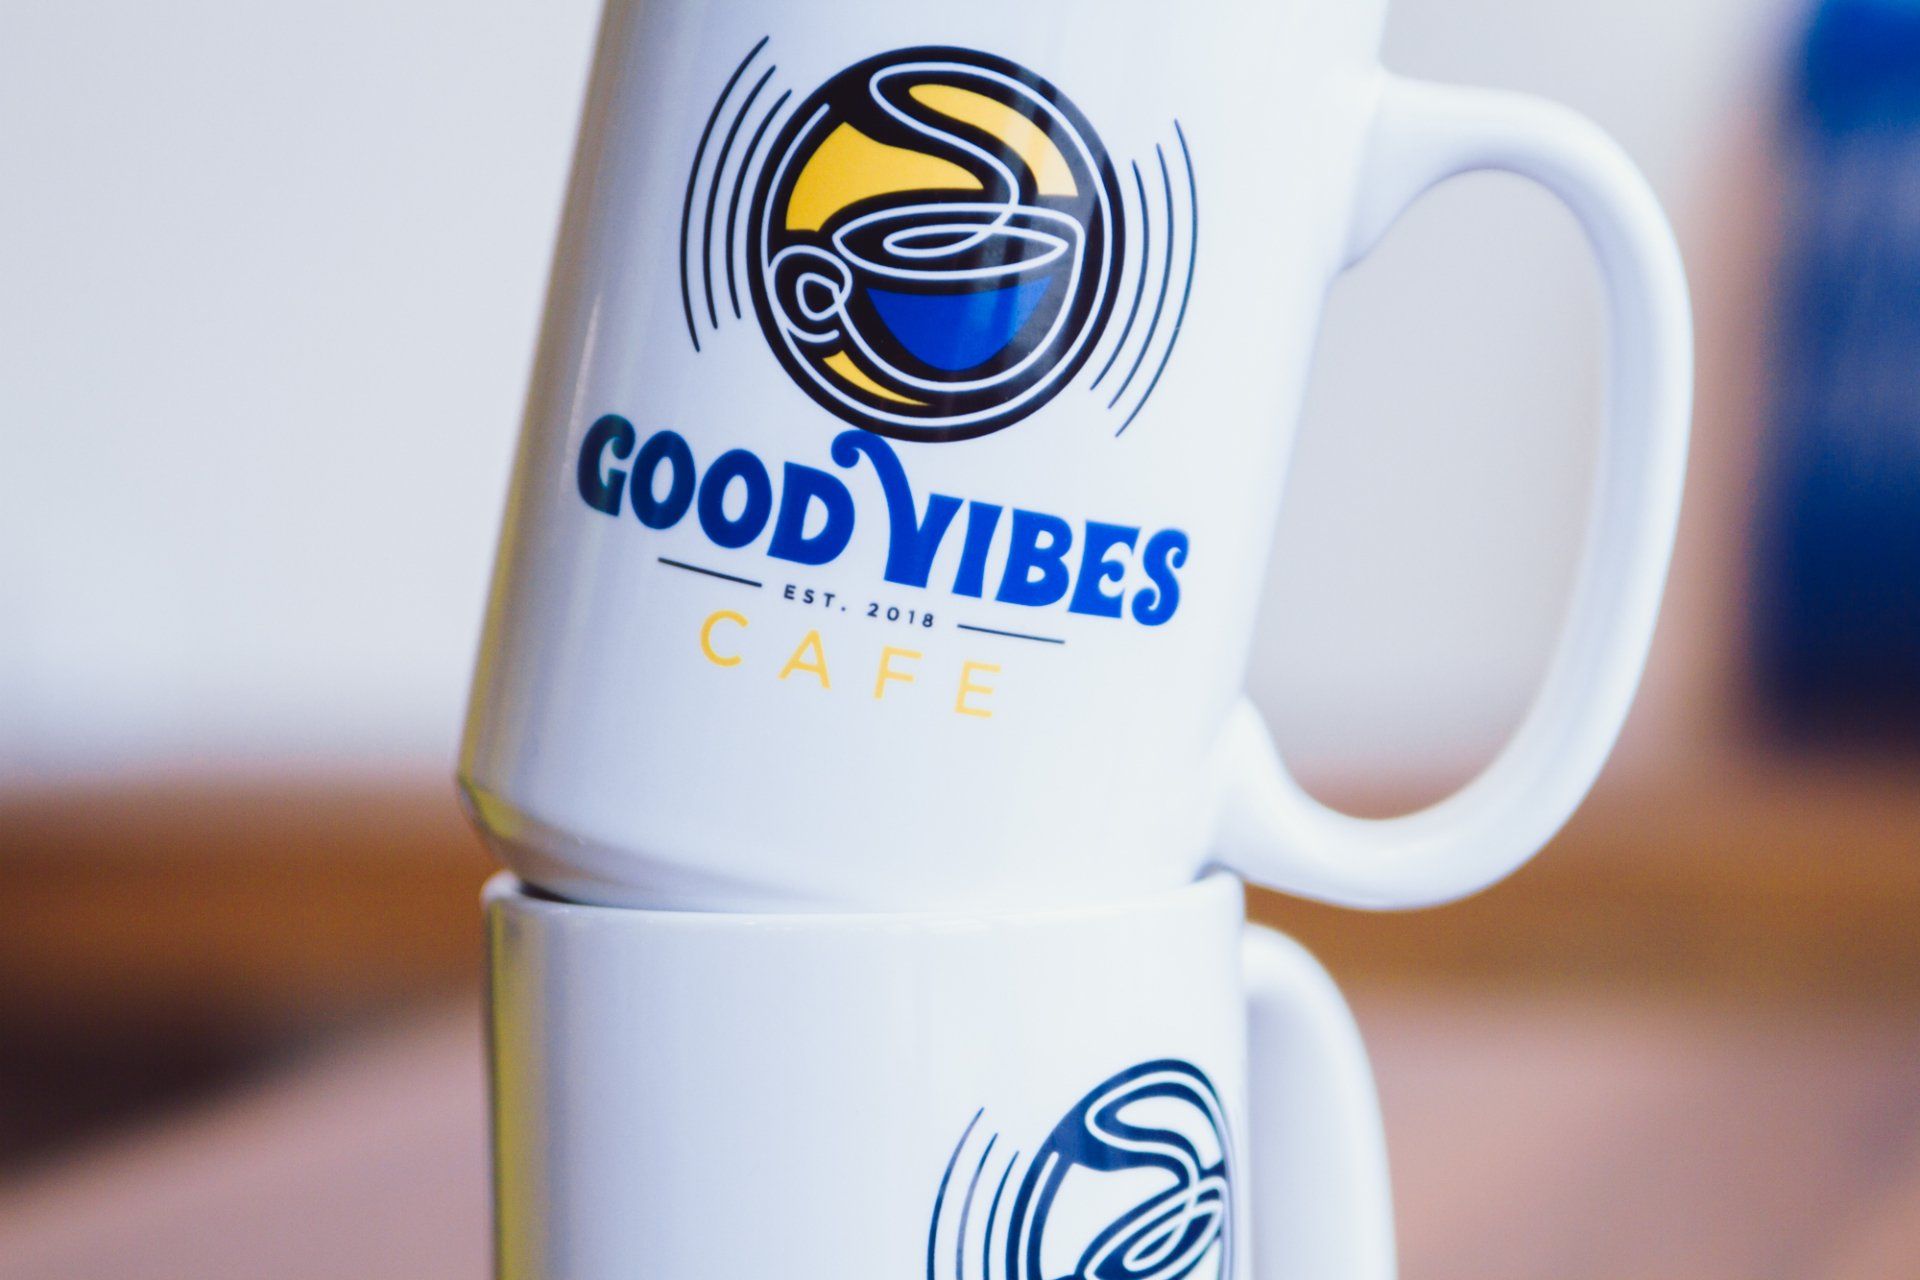 Good Vibes Cafe Gallery